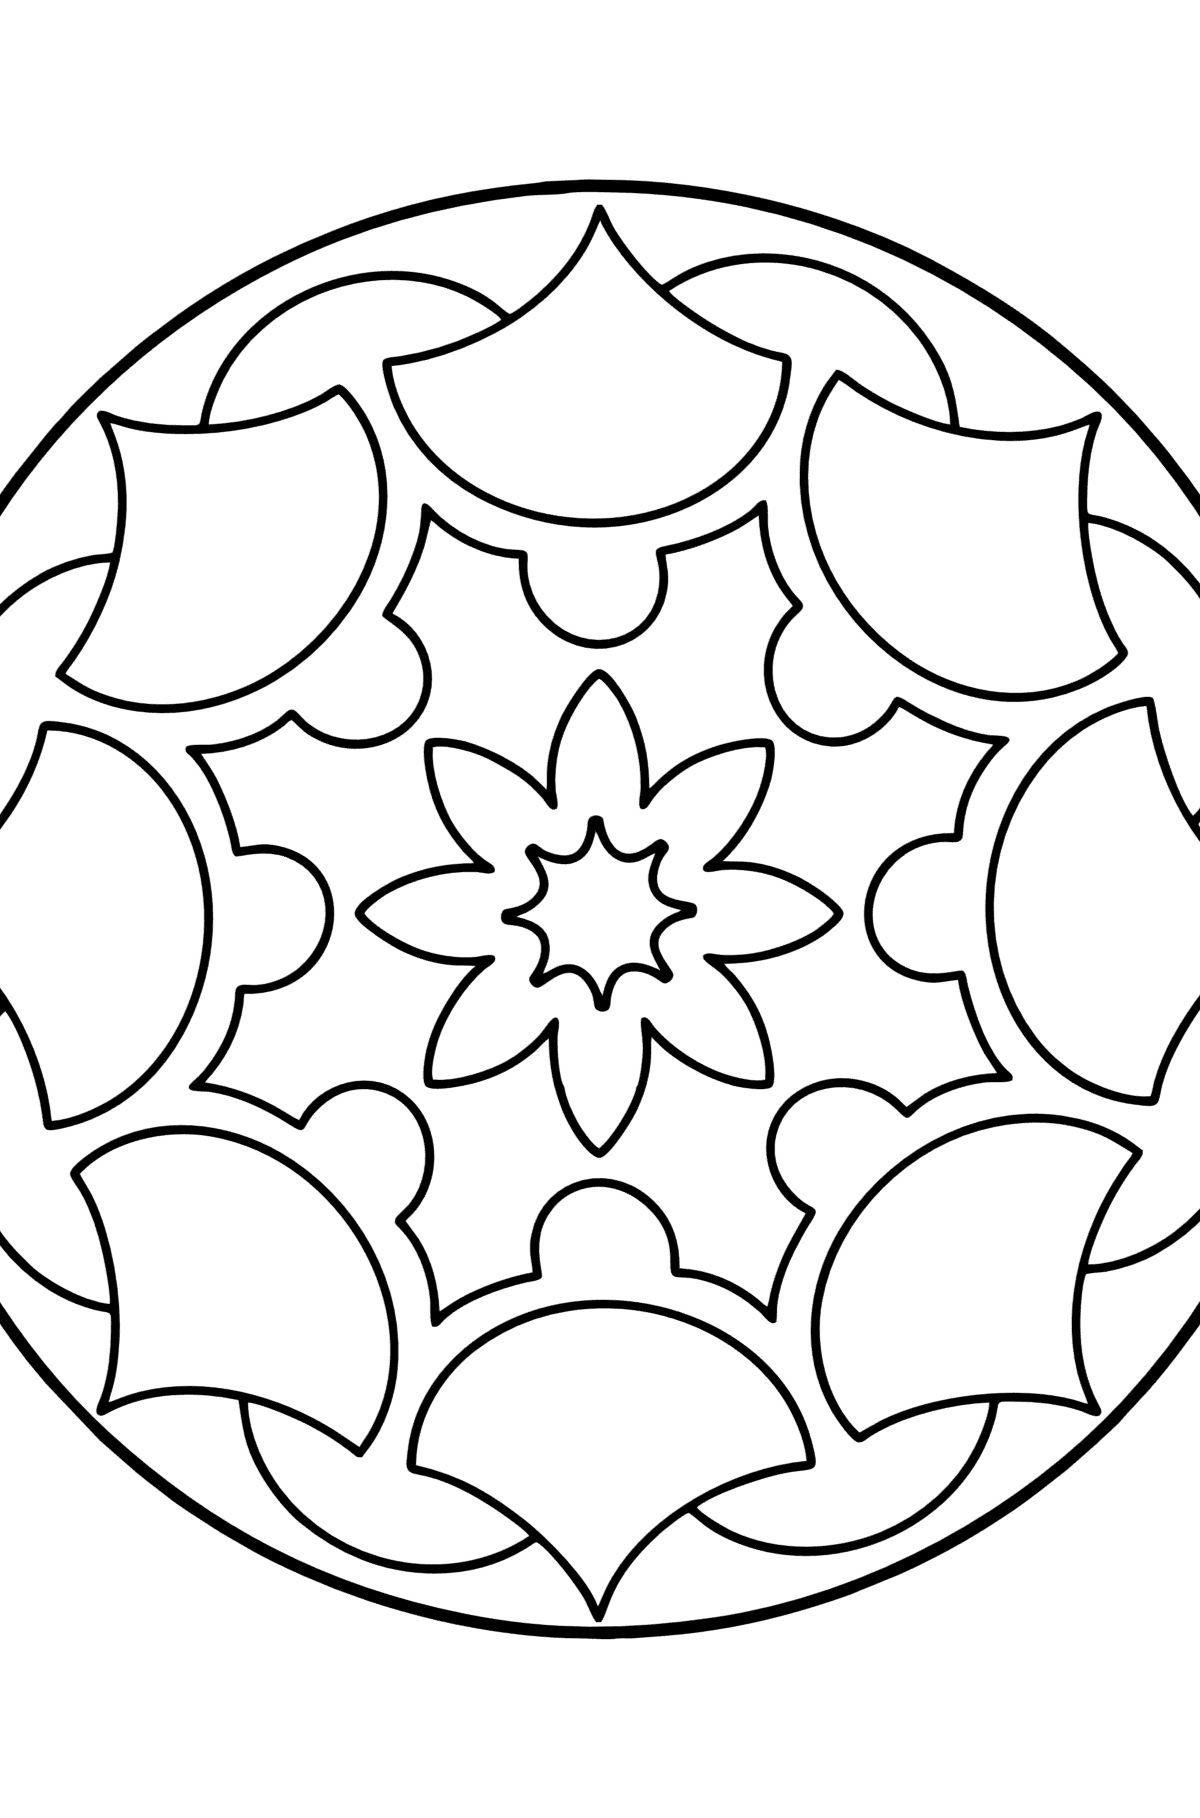 Mandala coloring page - 13 elements - Coloring Pages for Kids